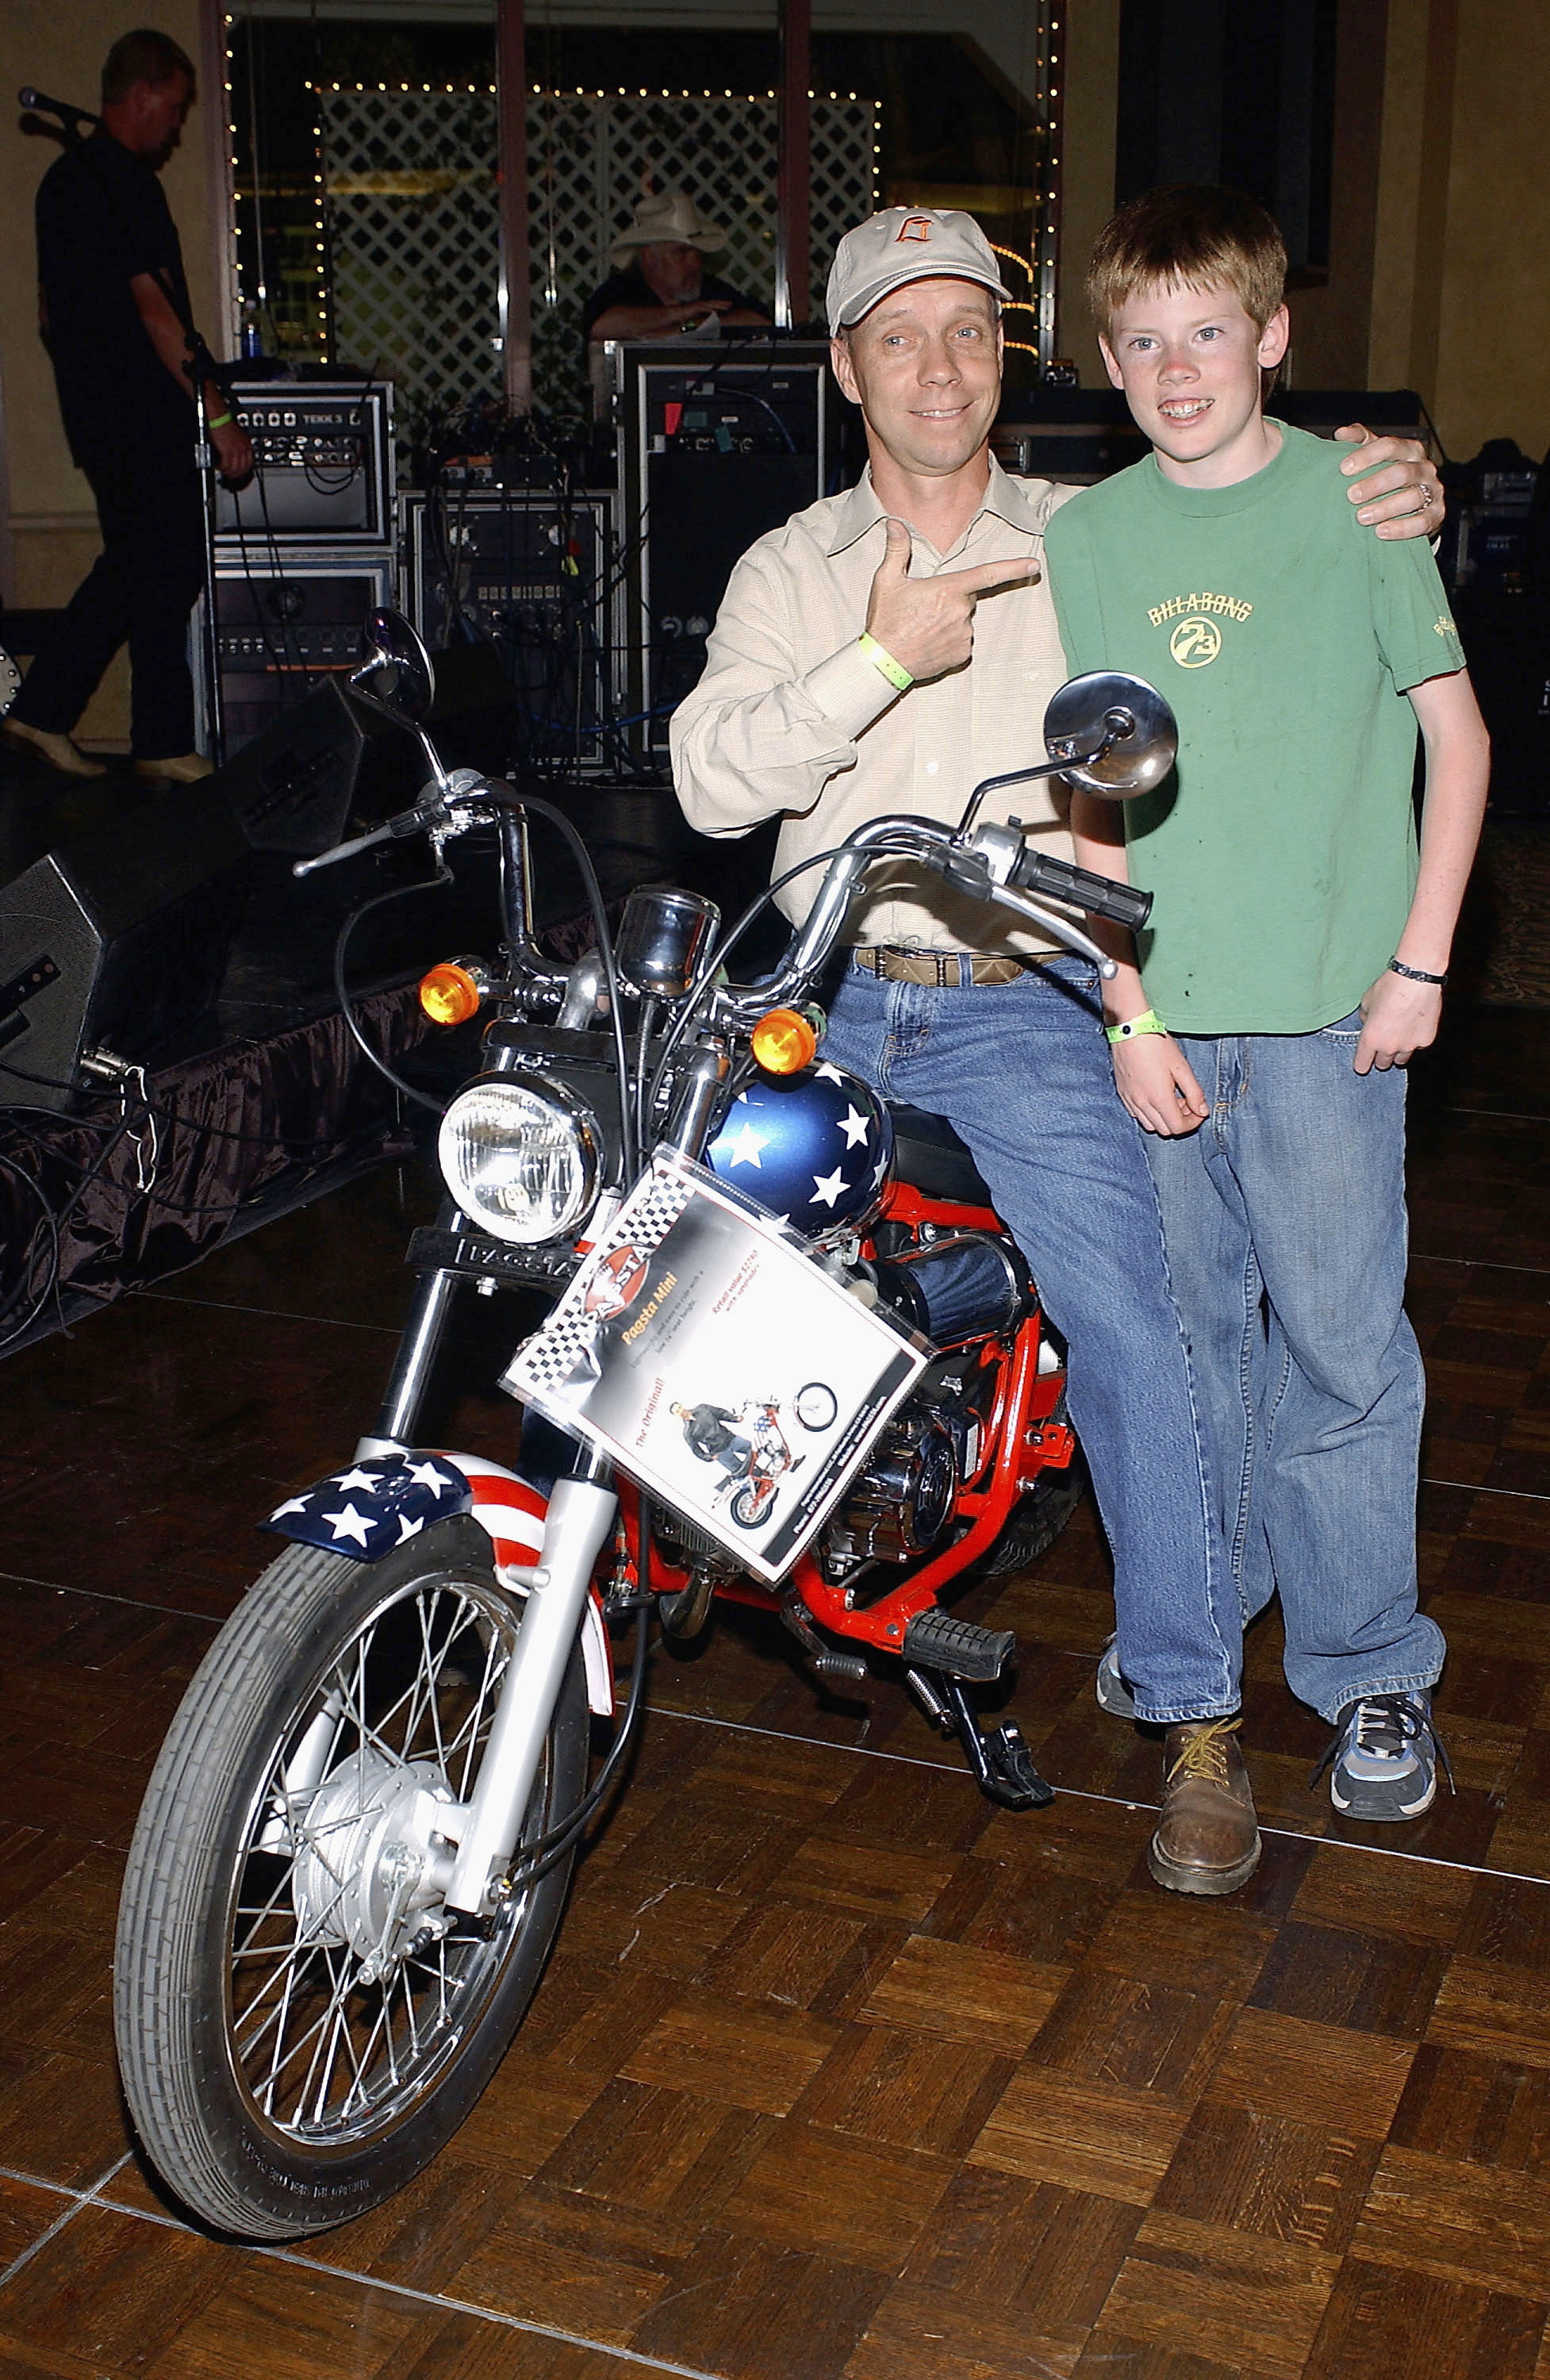 Scott Hamilton and his son Charlie pose at the 14th Annual Hollywood Charity Horse Show on May 1, 2004 in Burbank, California | Source: Getty Images